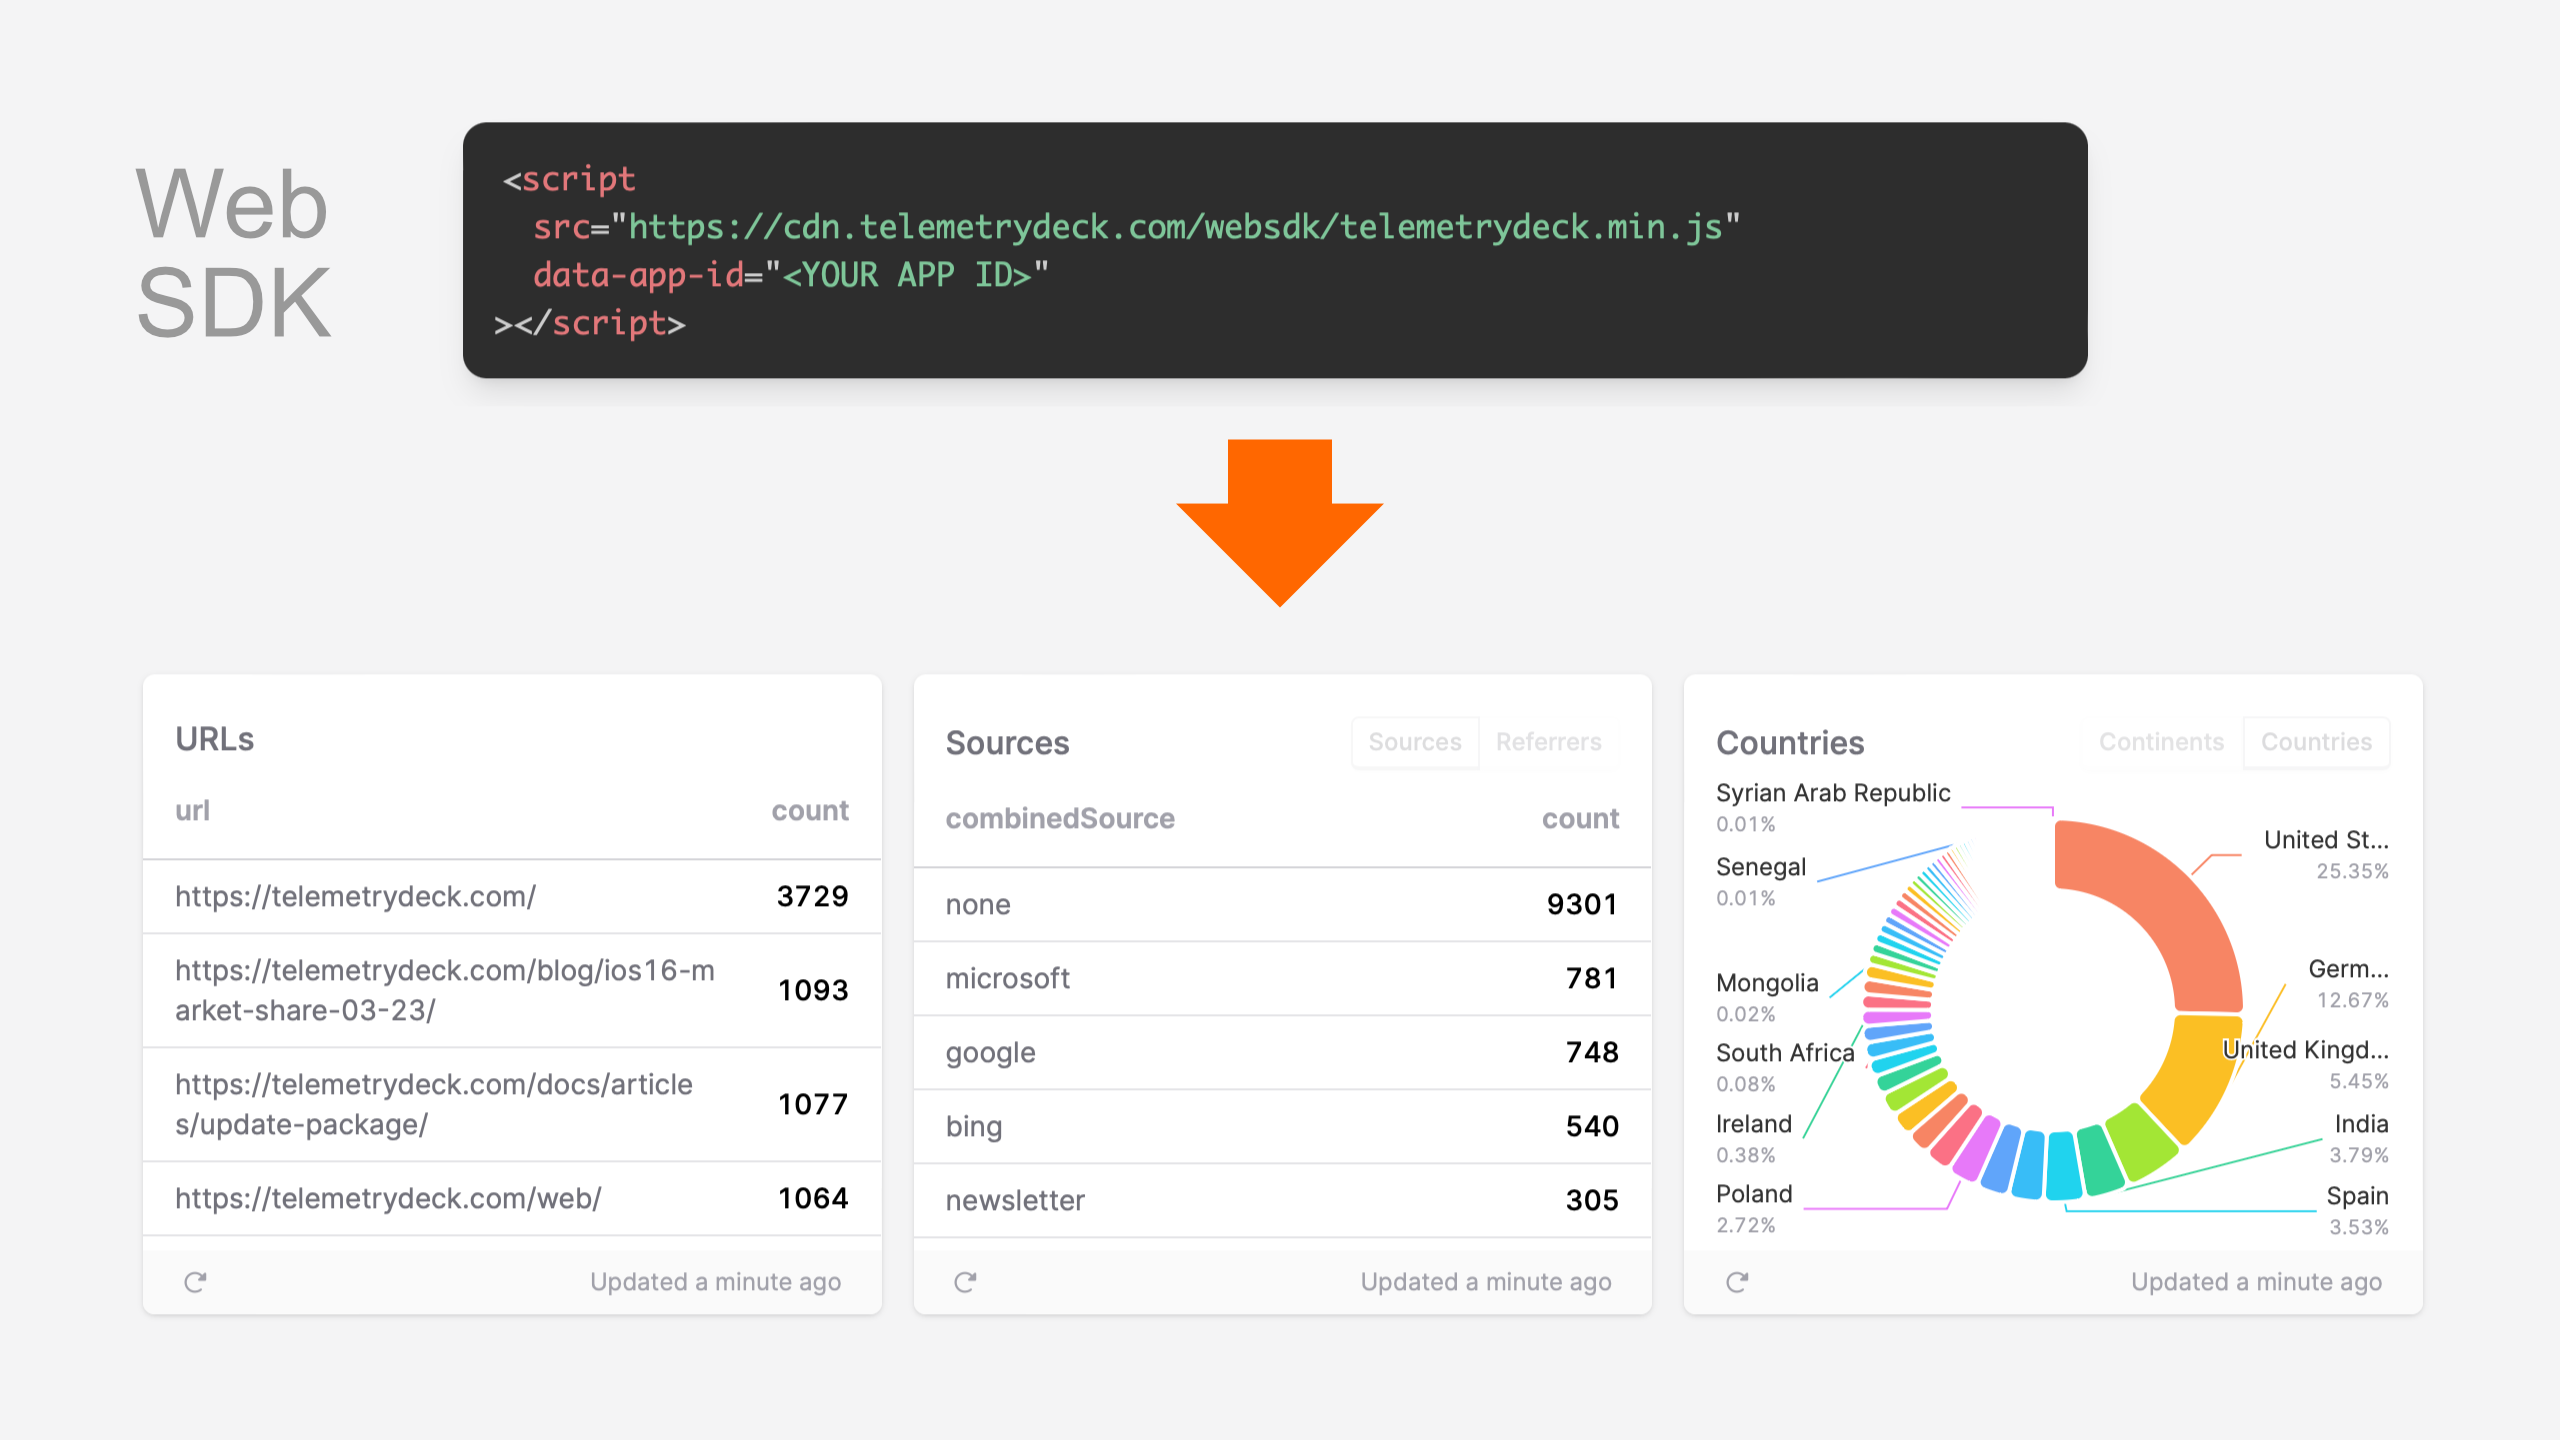 Visual Explanation of the Web SDK: Add a line of code to your website to get web analytics data